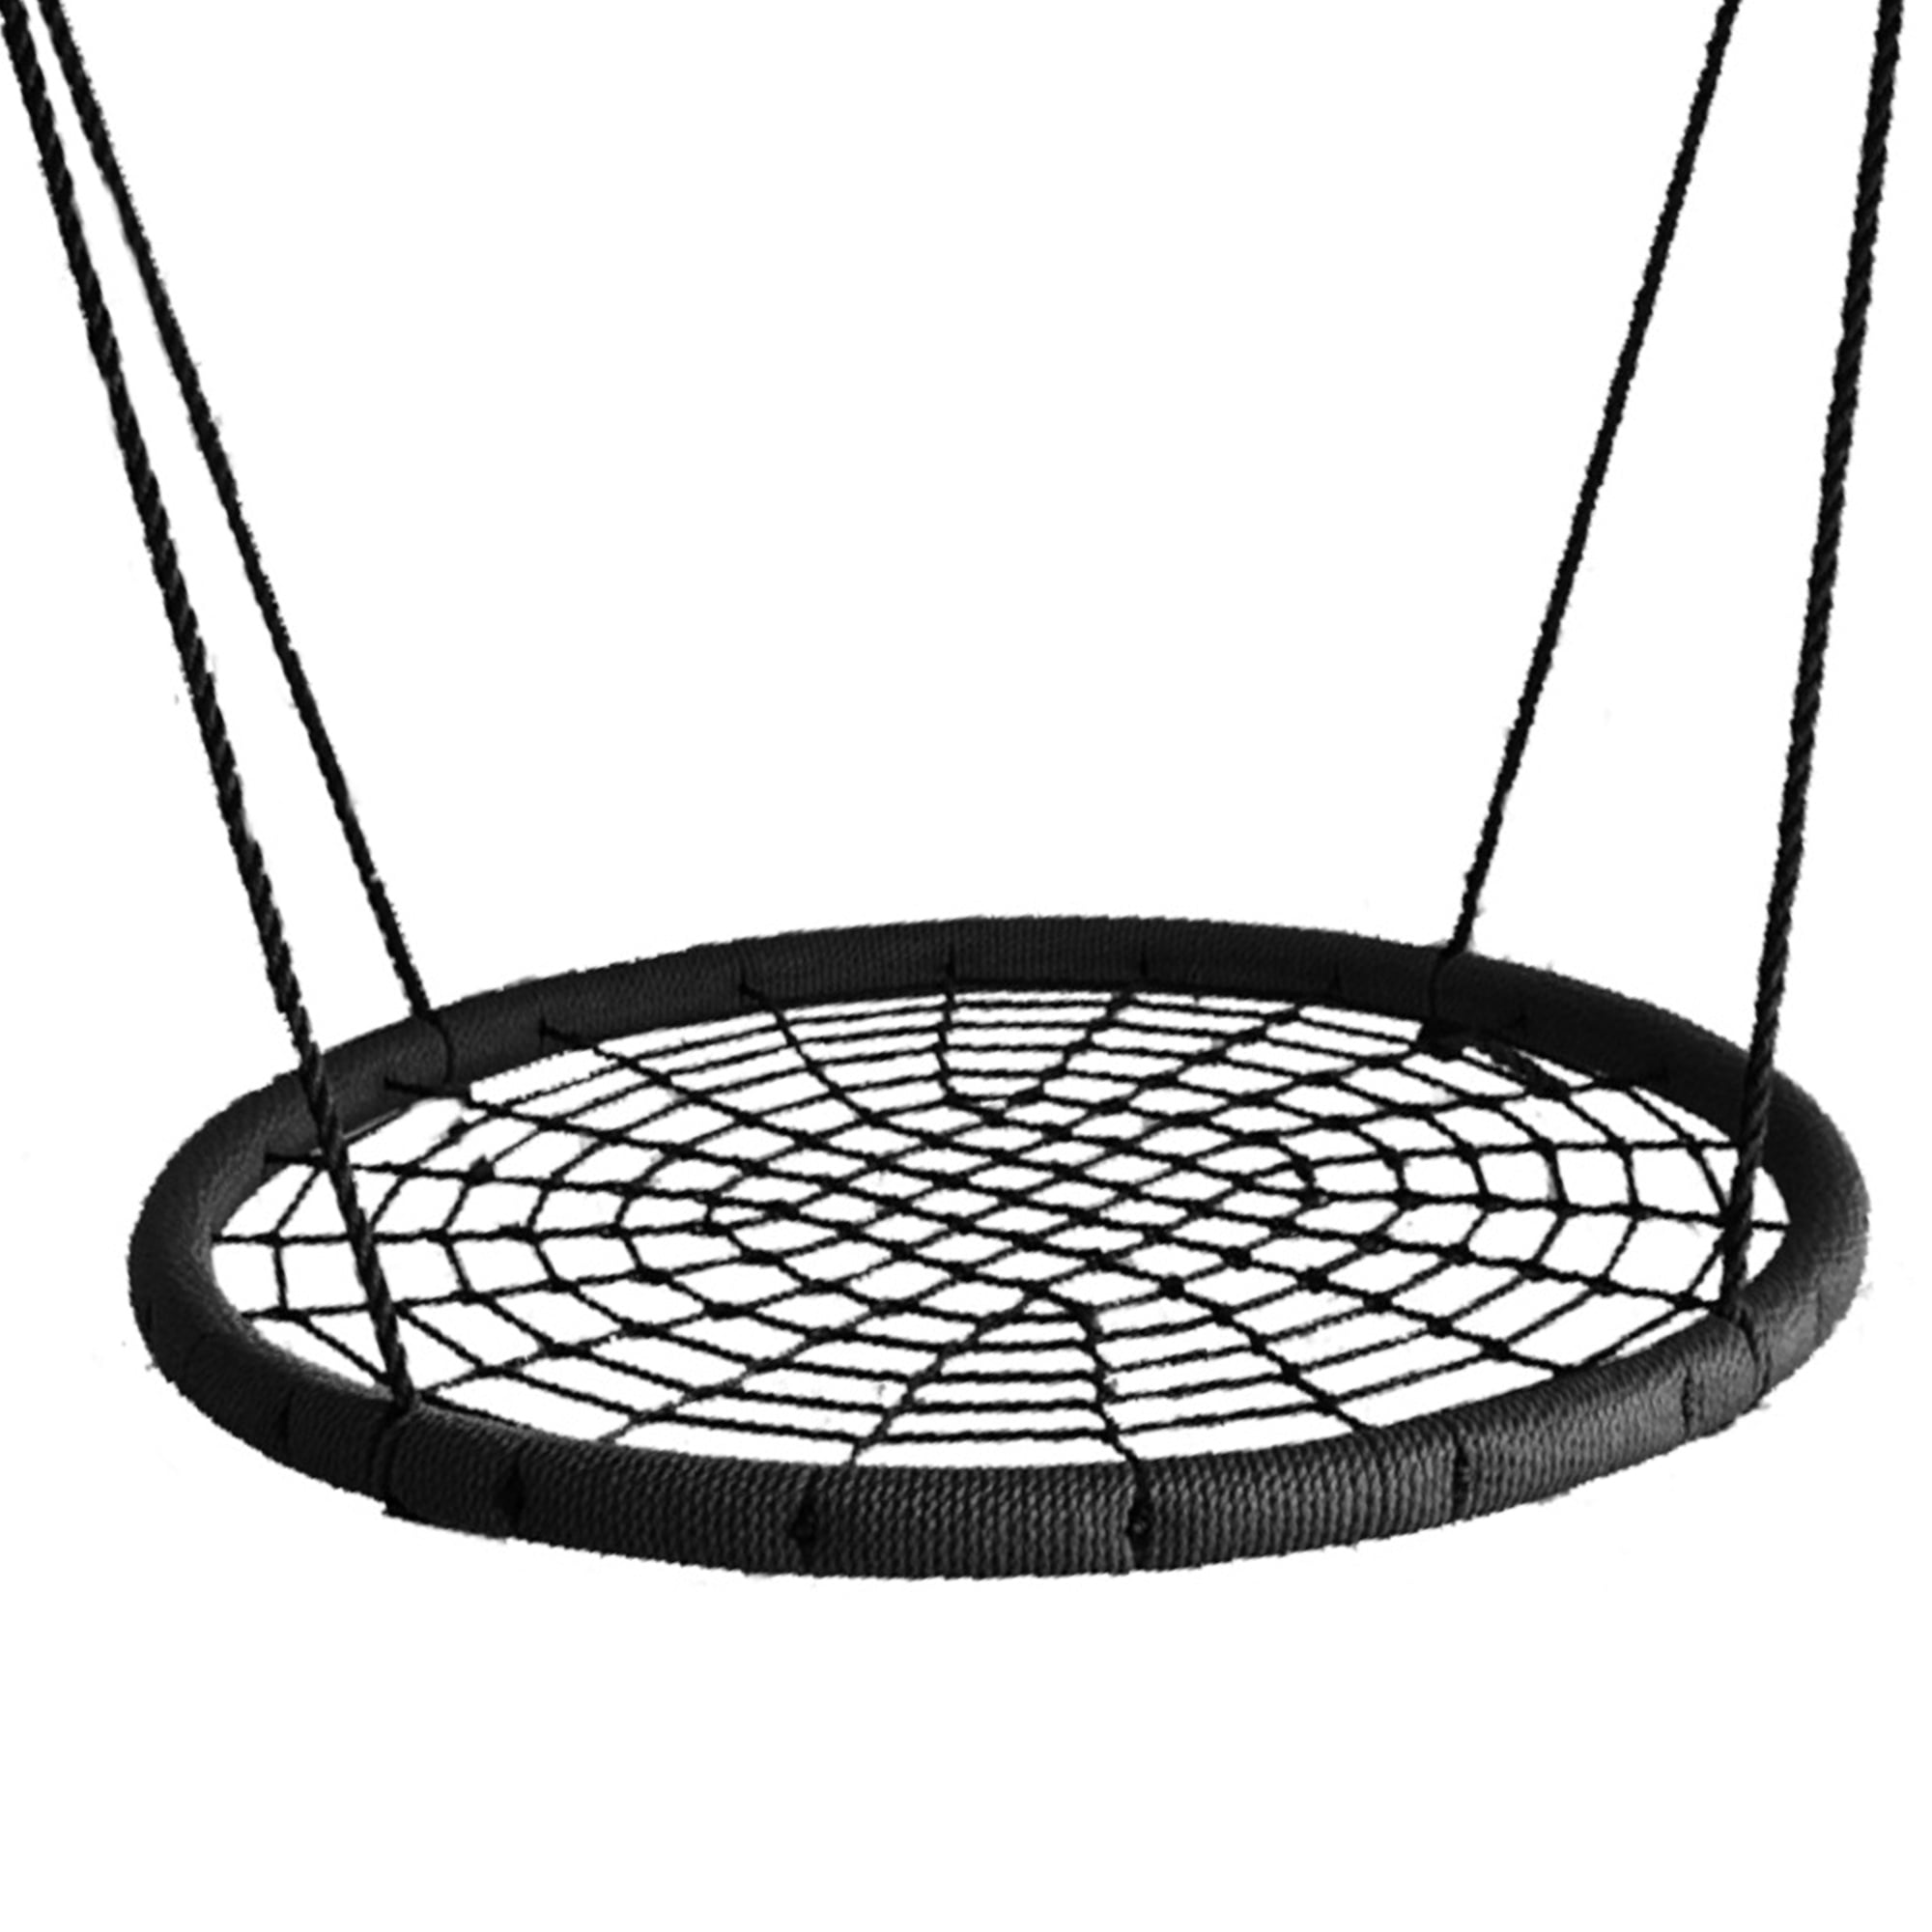 M  M Sales Enterprises Web Riderz Outdoor Swing N' Spin Safety rated to 600 lb, 